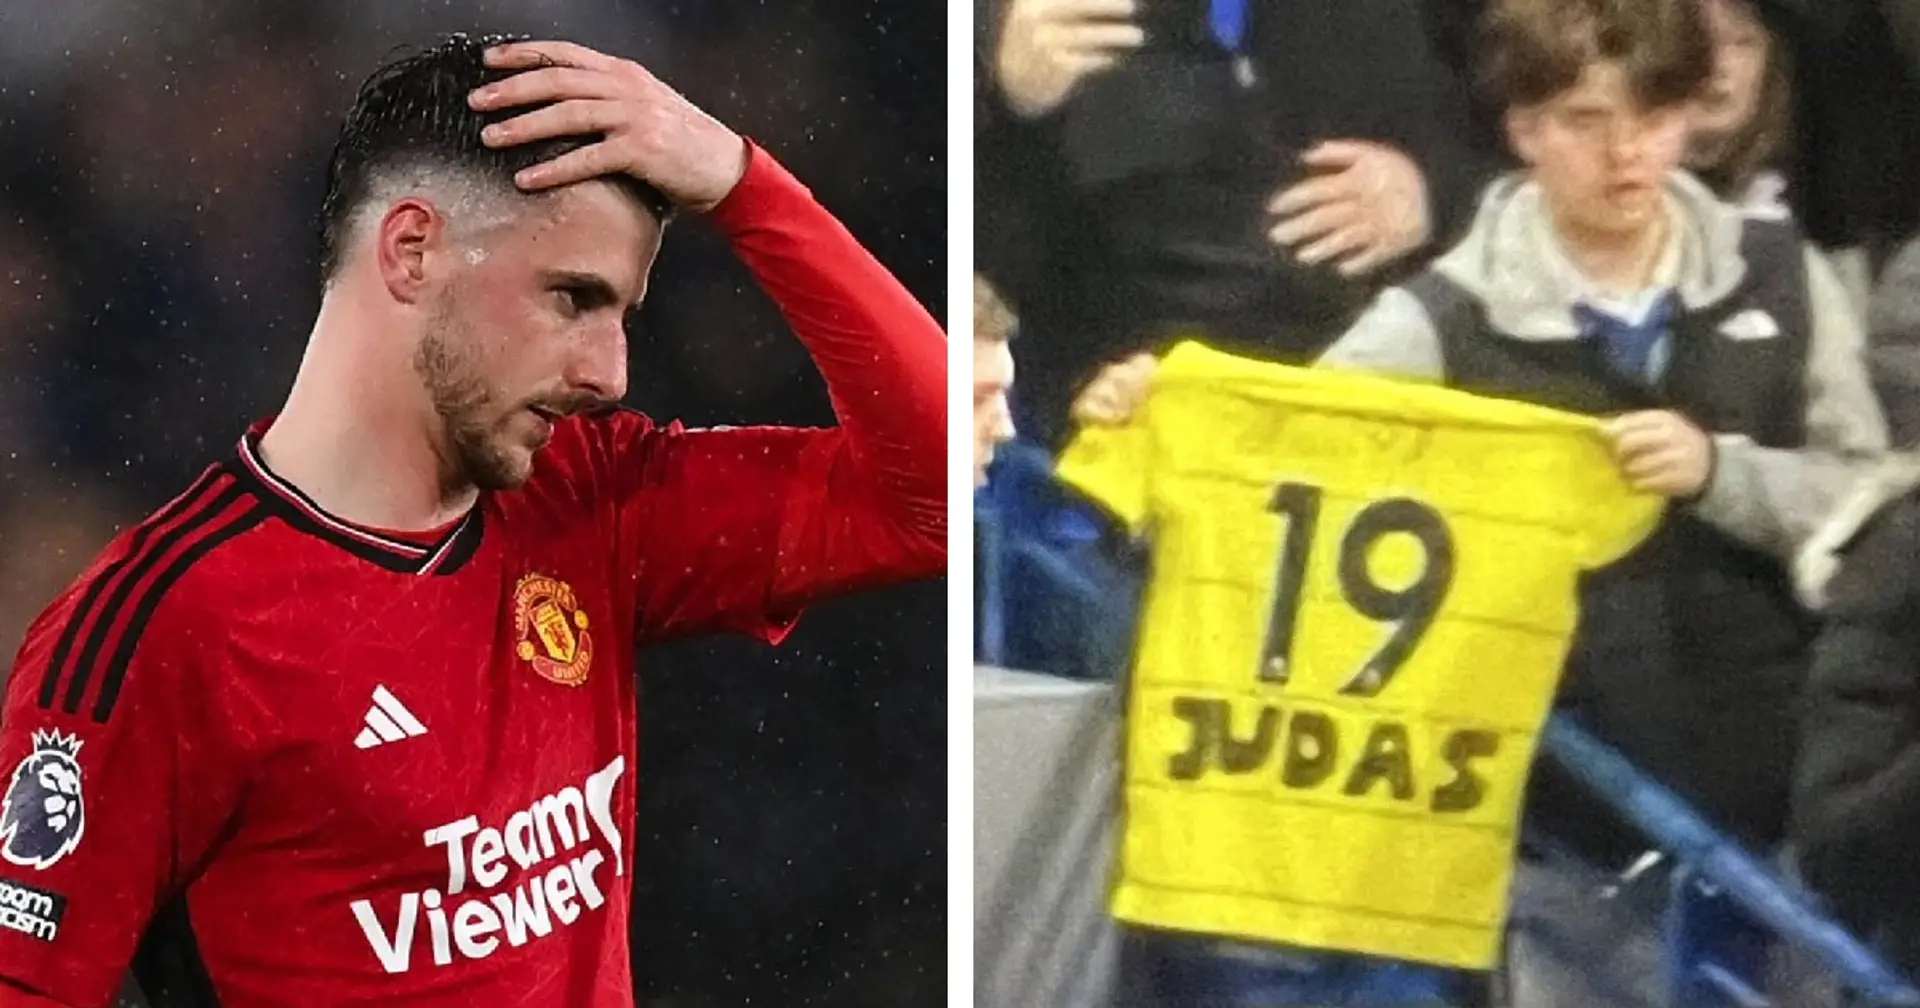 Spotted: Fan holds up Mount Chelsea shirt with 'Judas' written on it - Football | Tribuna.com